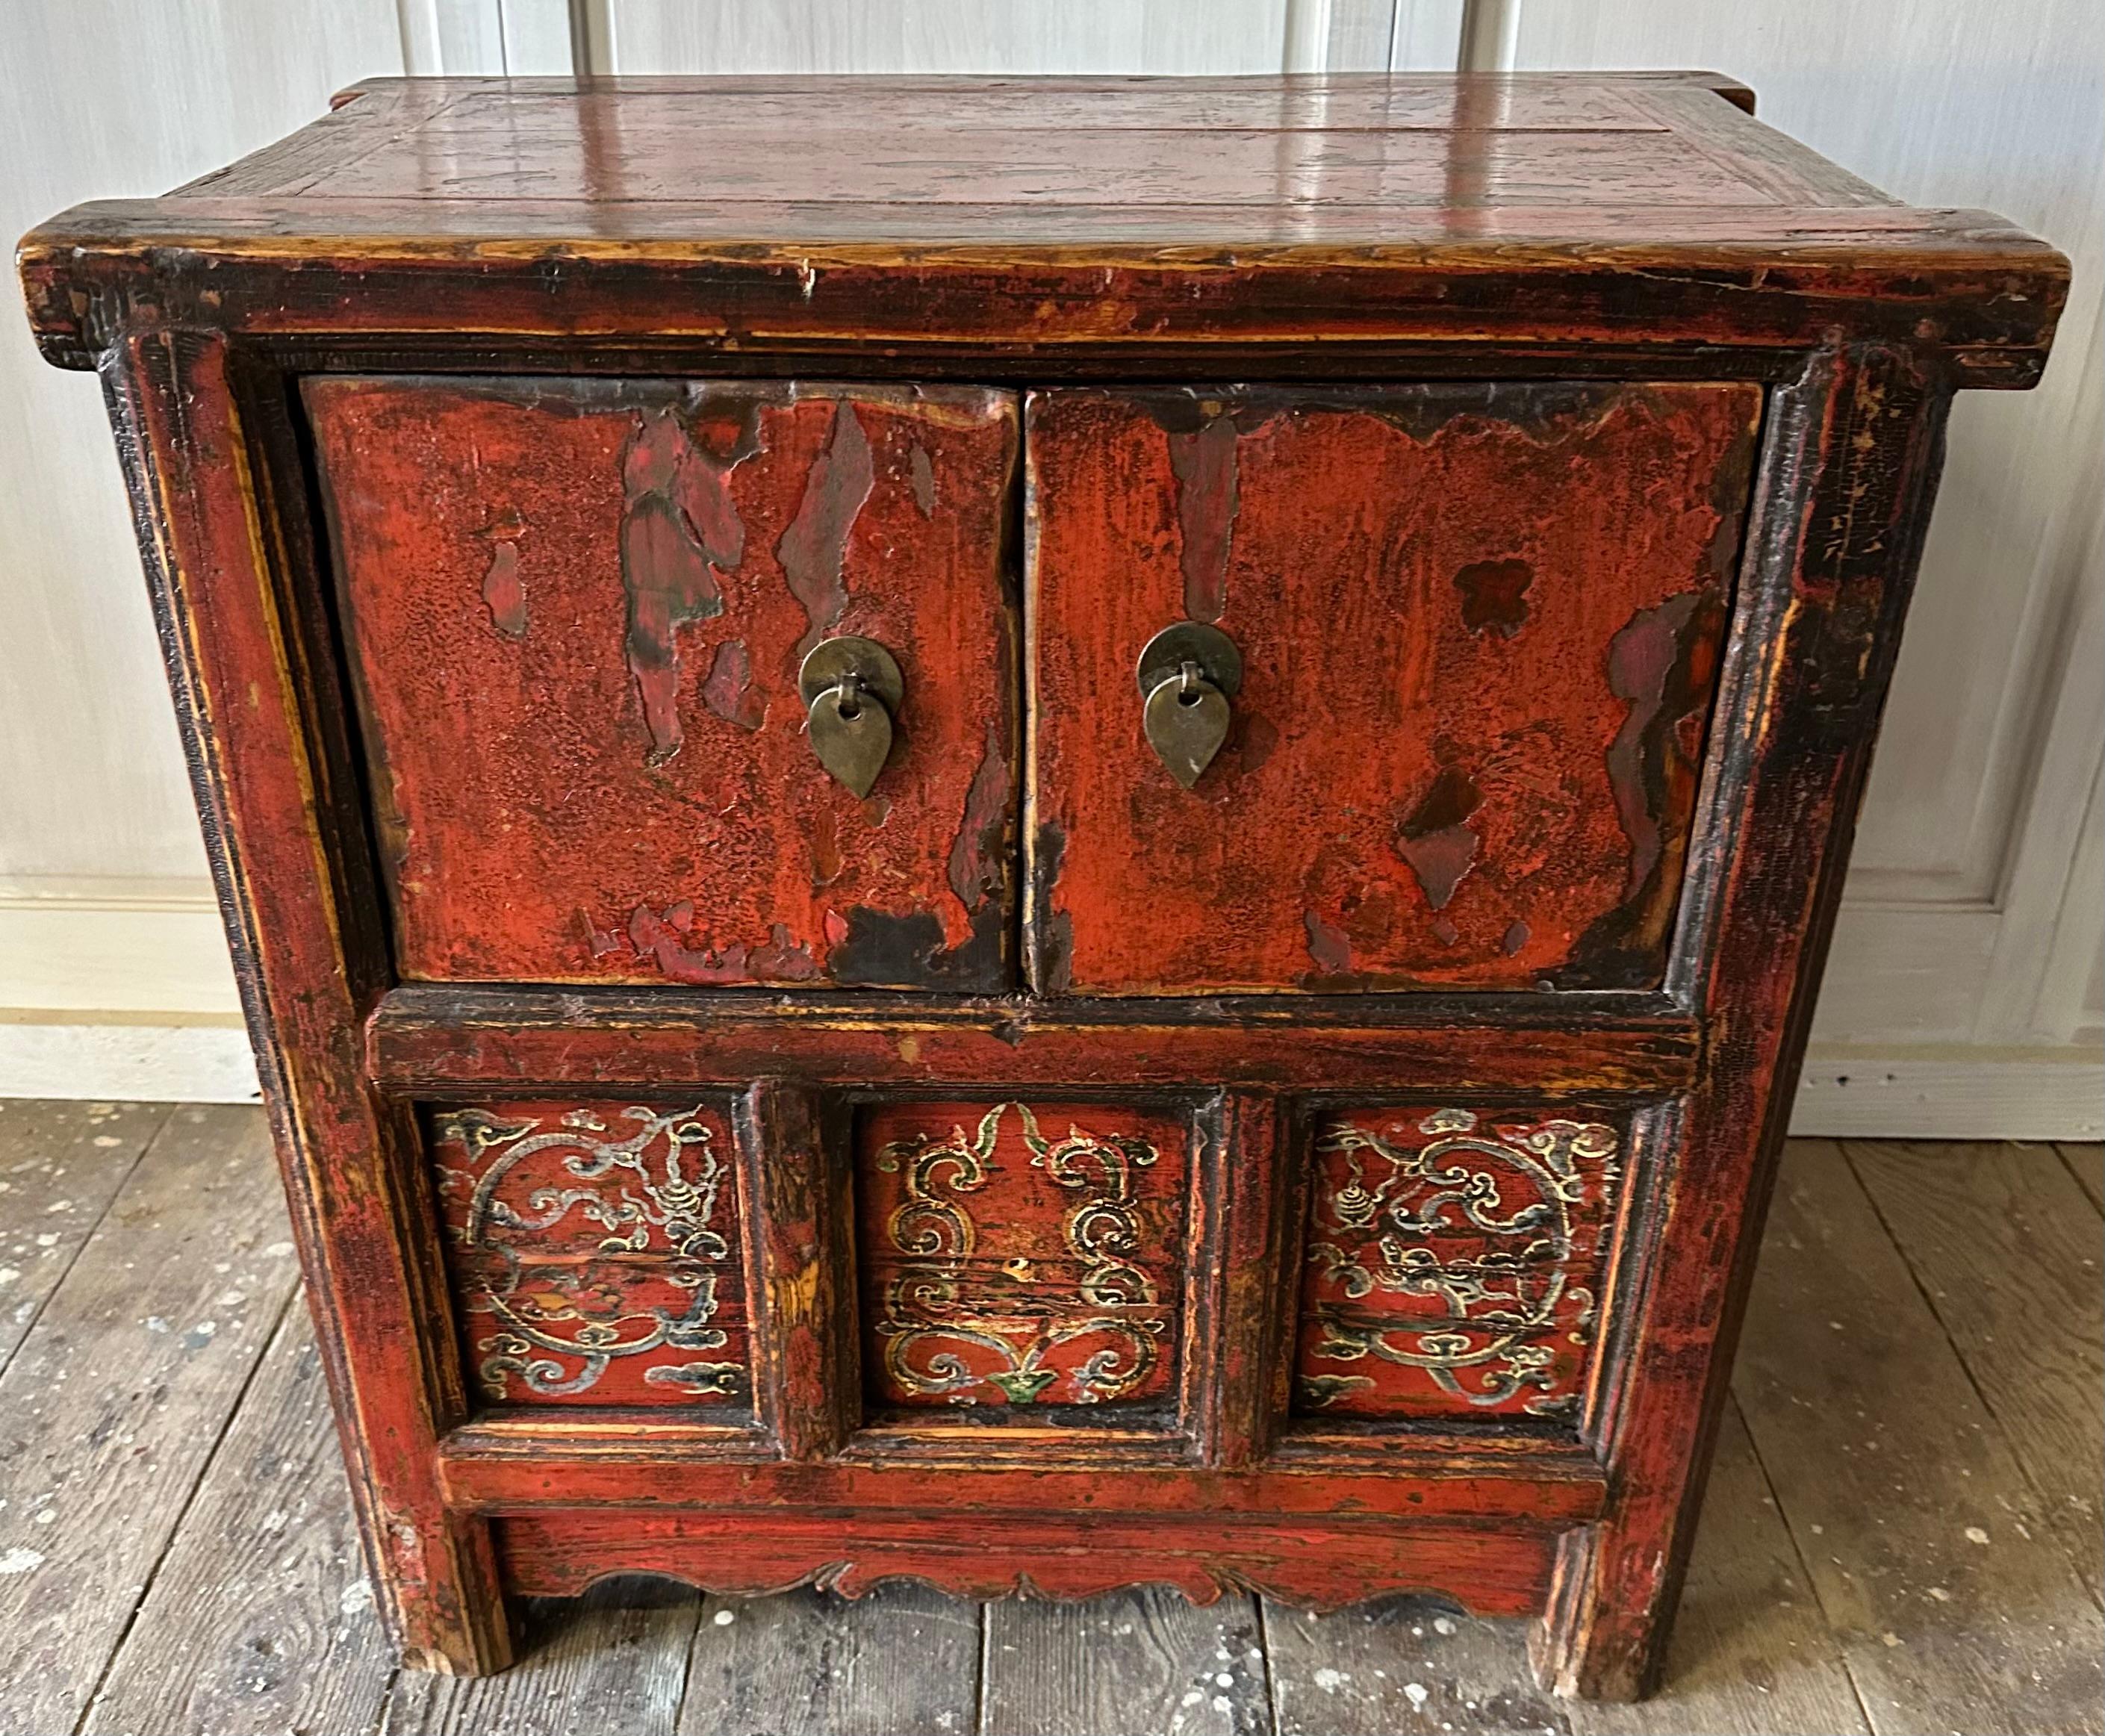 Late 19th century Chinese elmwood cabinets in an old lacquered finish. This cabinet can be ideal as a bedside chest, end table next to a sofa or a cabinet in an hallway.  it  has two doors that opens up to a large deep interior cavity.
This cabinet